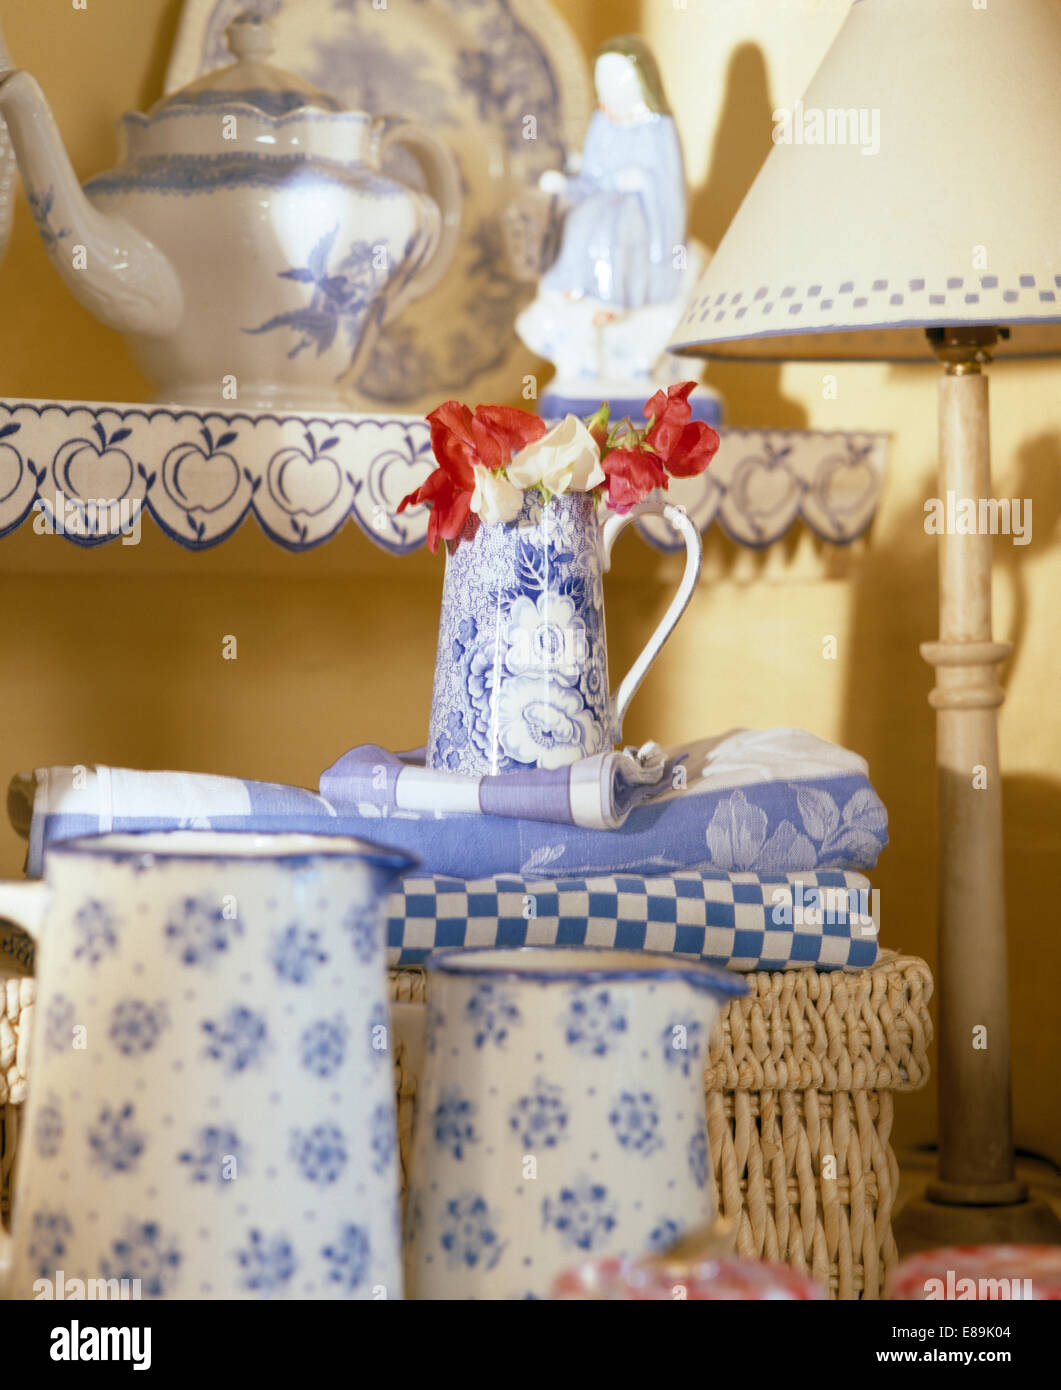 Close-up of blue+white jugs below shelves with decorative blue+white painted edging Stock Photo